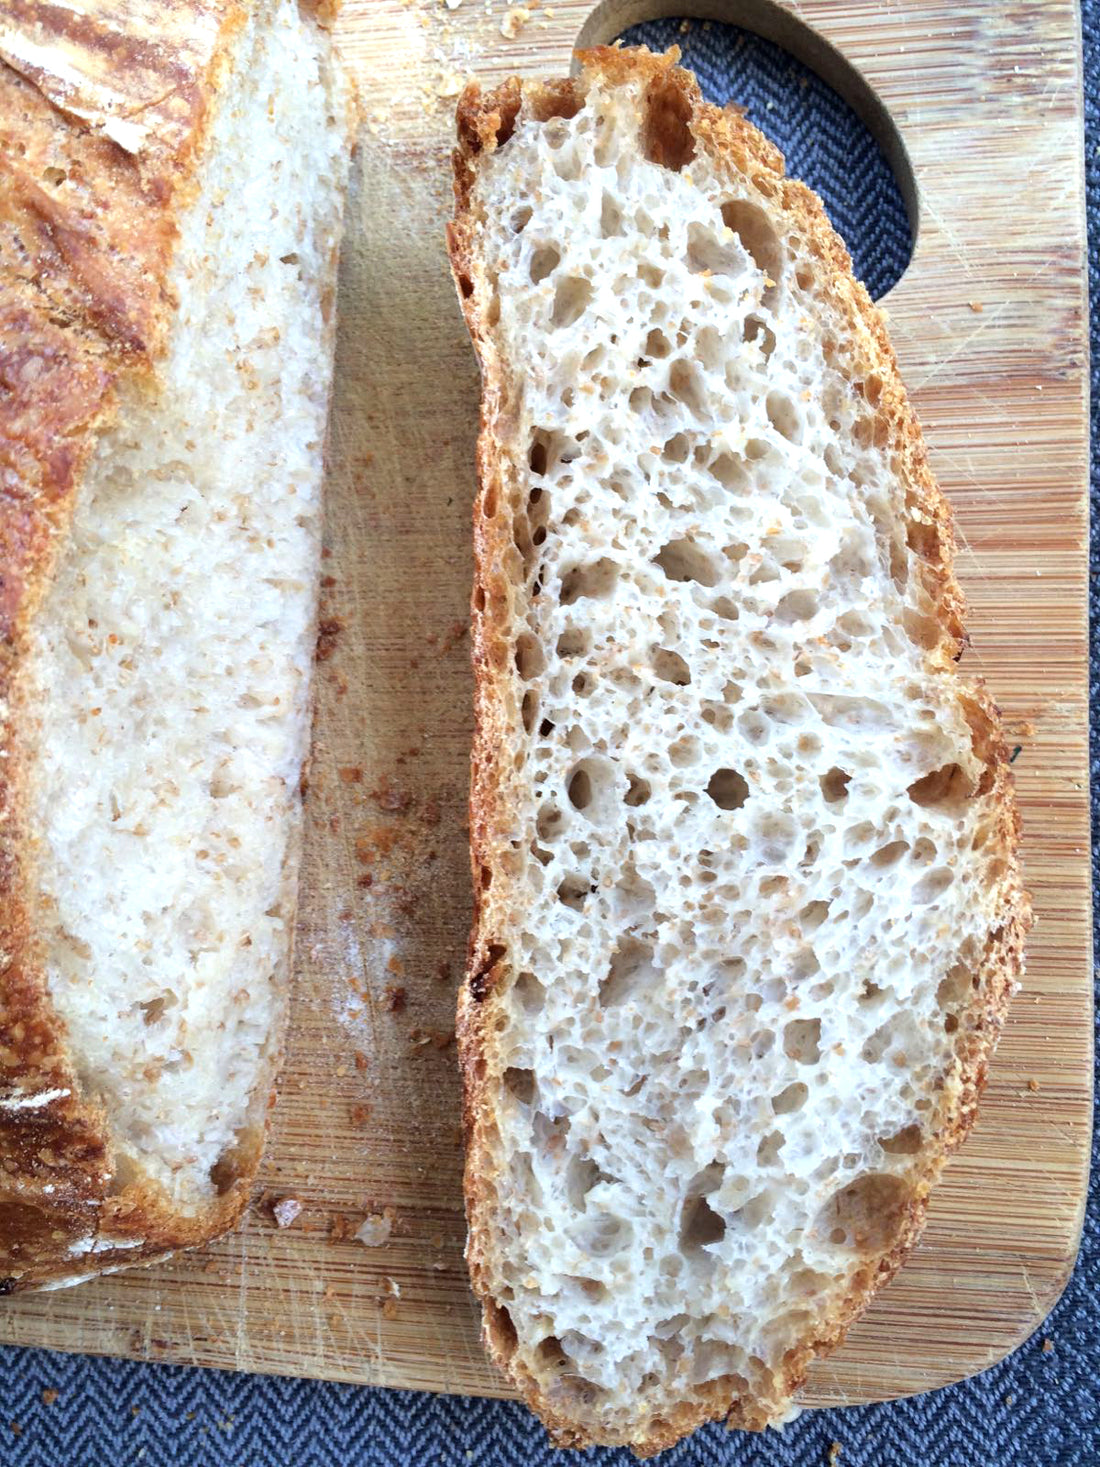 We hand make our own sourdough bread when the hectic time in the studio allows